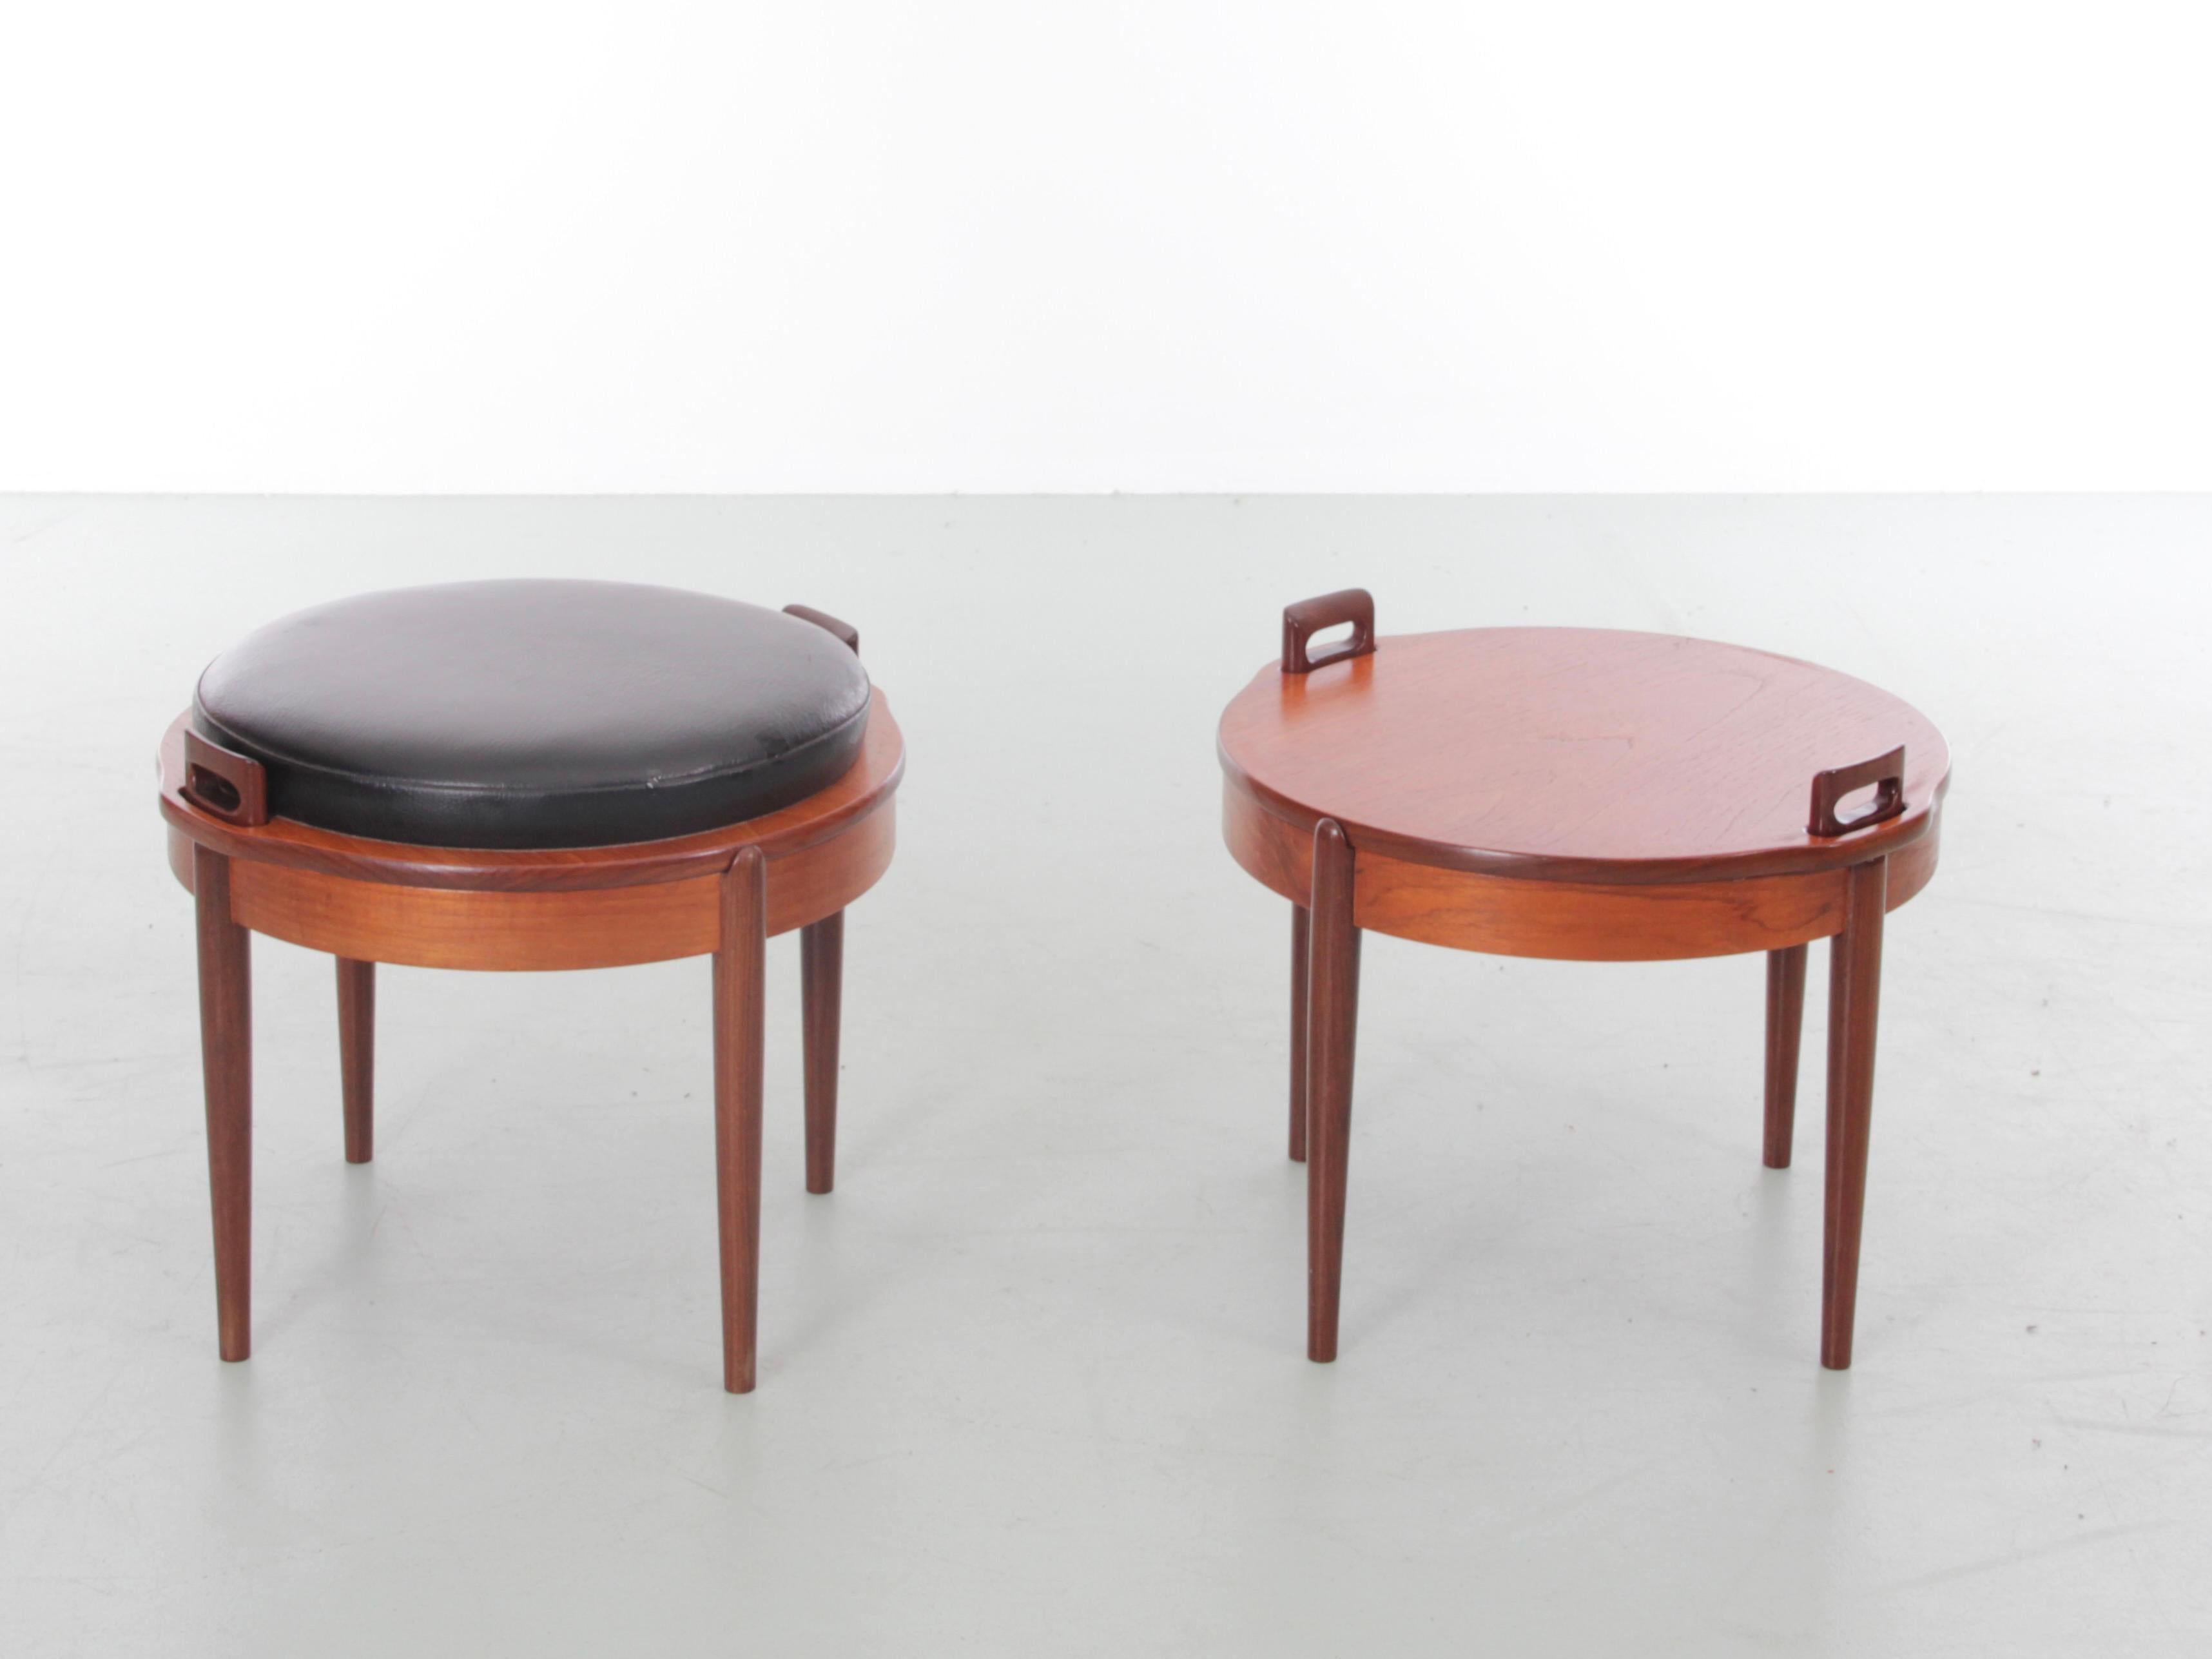 Mid-Century Modern Scandinavian pair of reversible Scandinavian stools in teak by BJ Hansen. Original simili leather seat. Some small scratches. Can be reupholstered on request. Price for the pair.